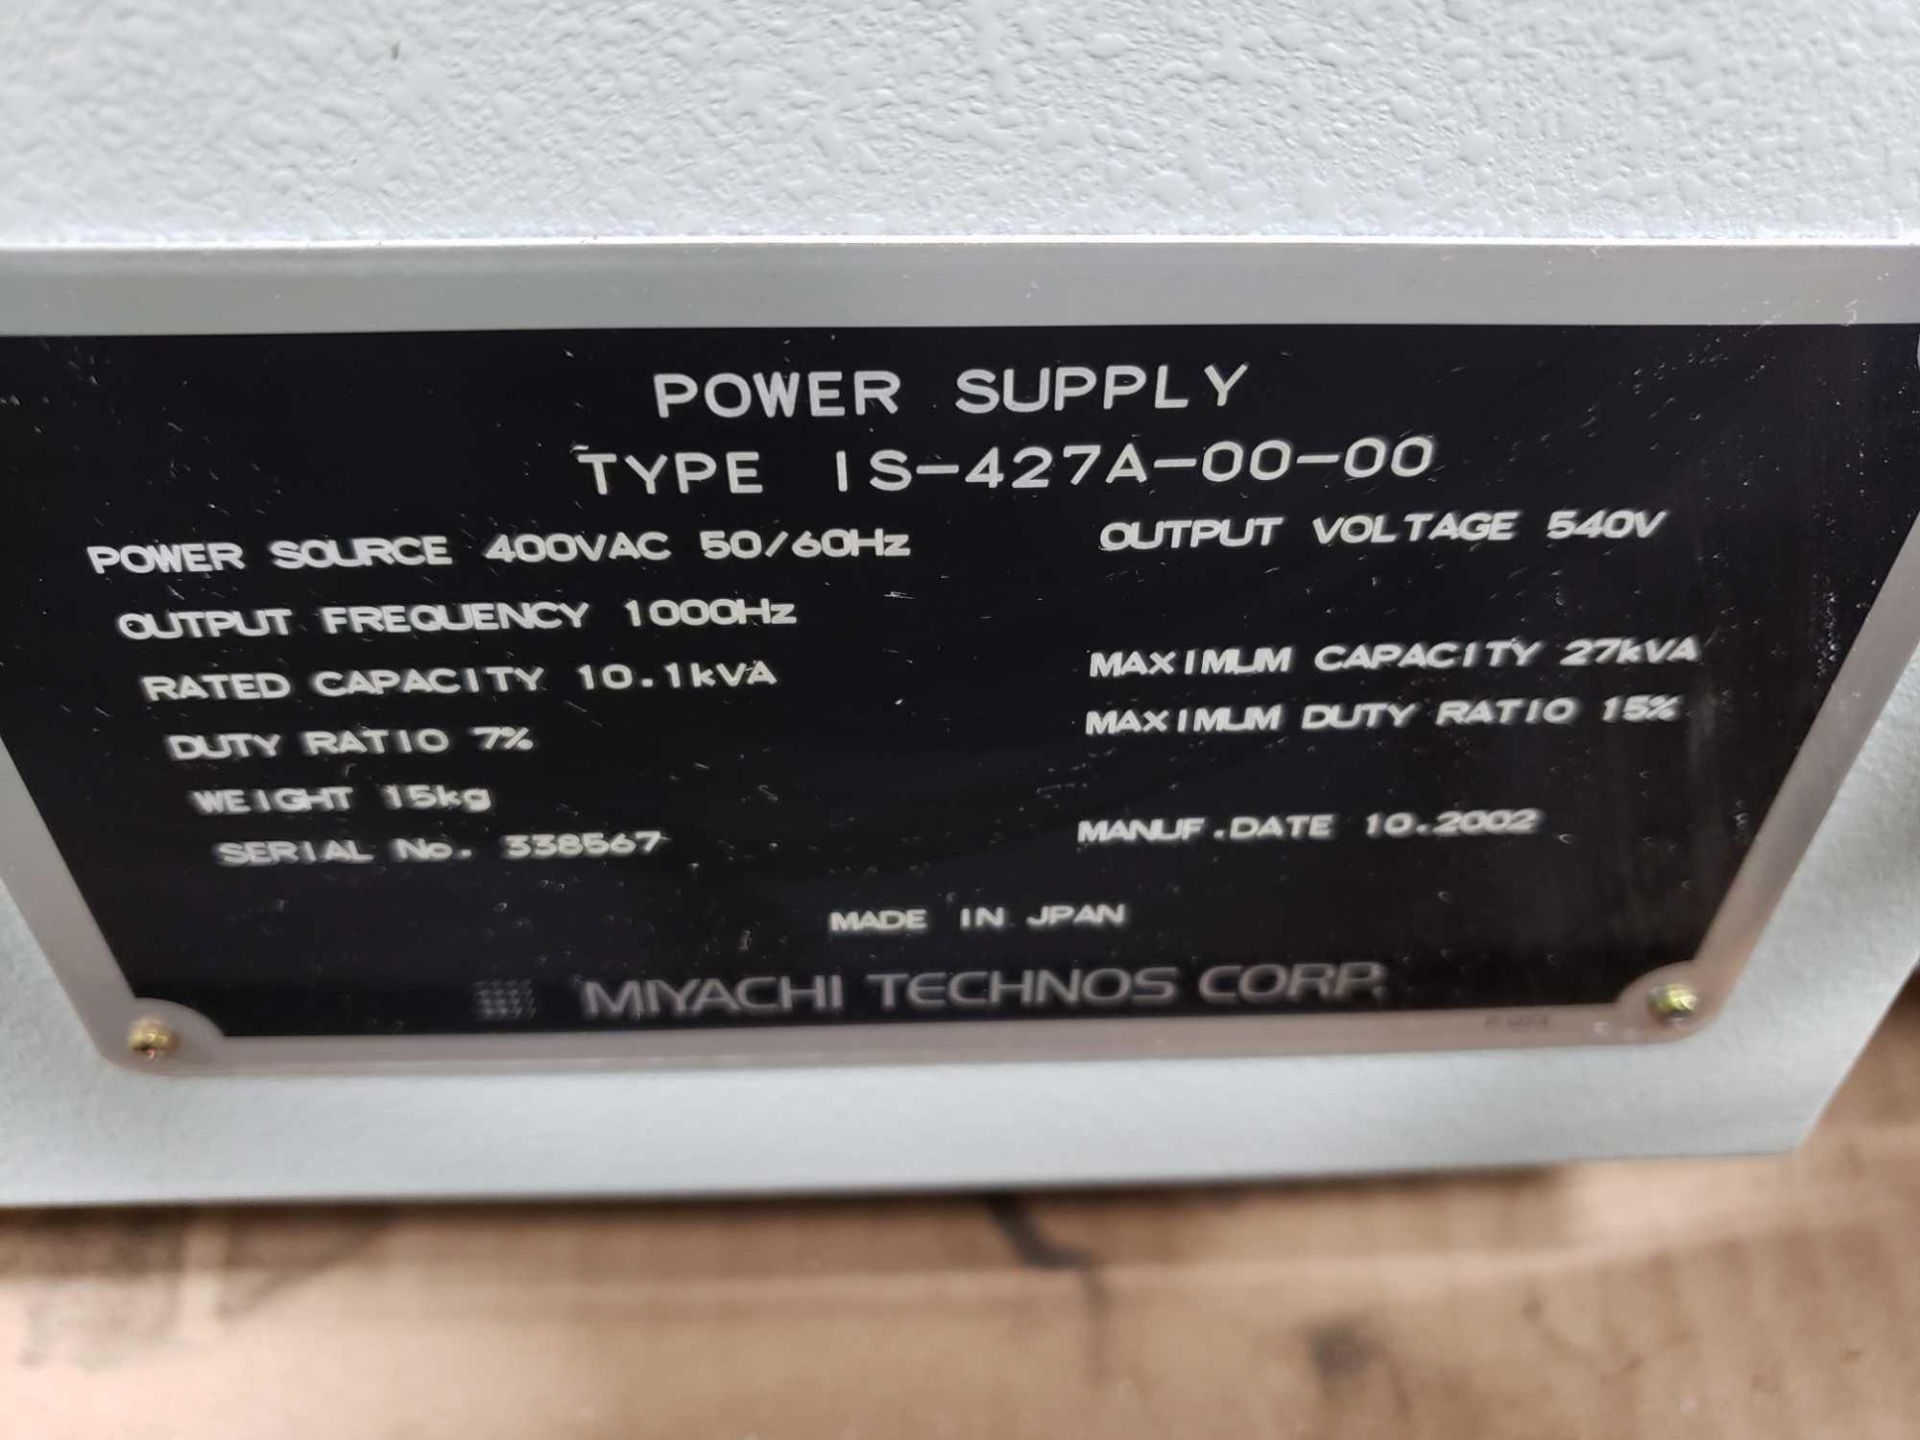 Miyachi Inverter Welding power supply model type IS-427A-00-OO. 27kVa. - Image 4 of 4